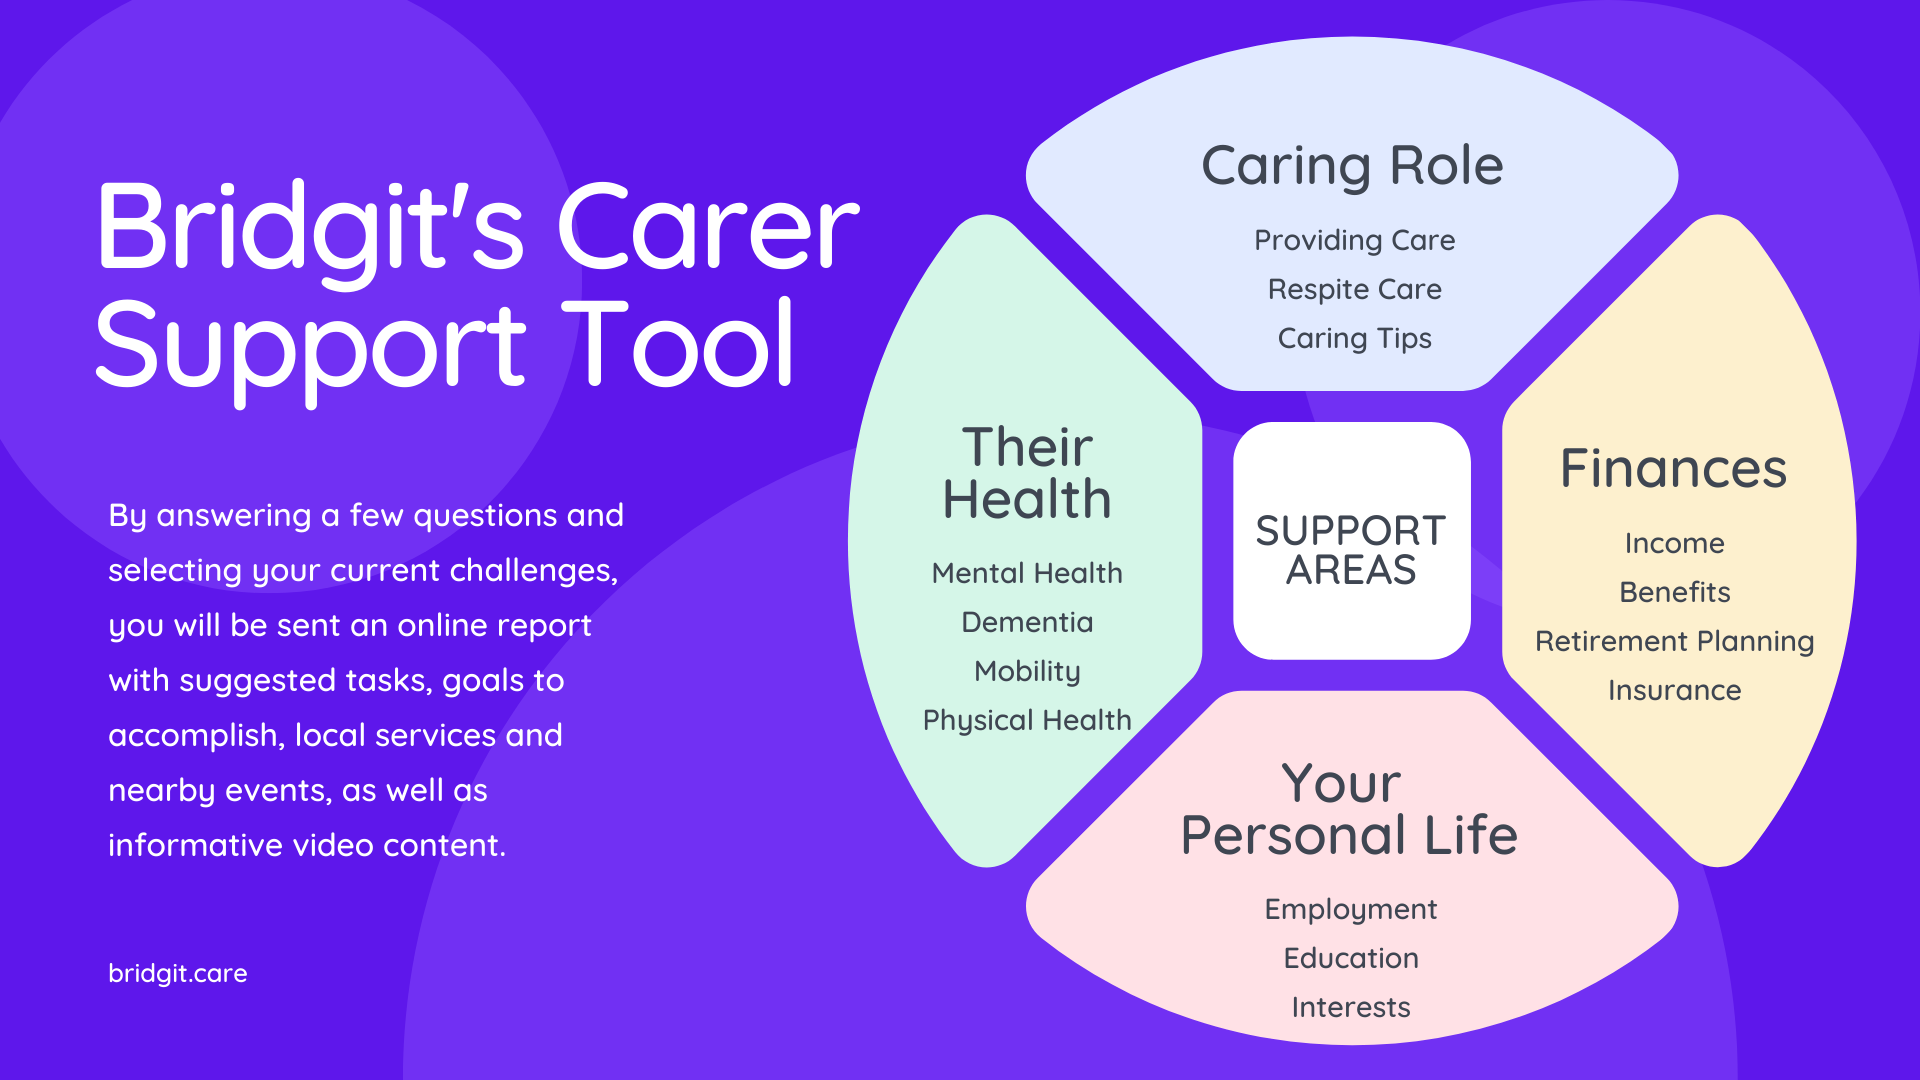 what does Bridgit's Carer Support Tool offer